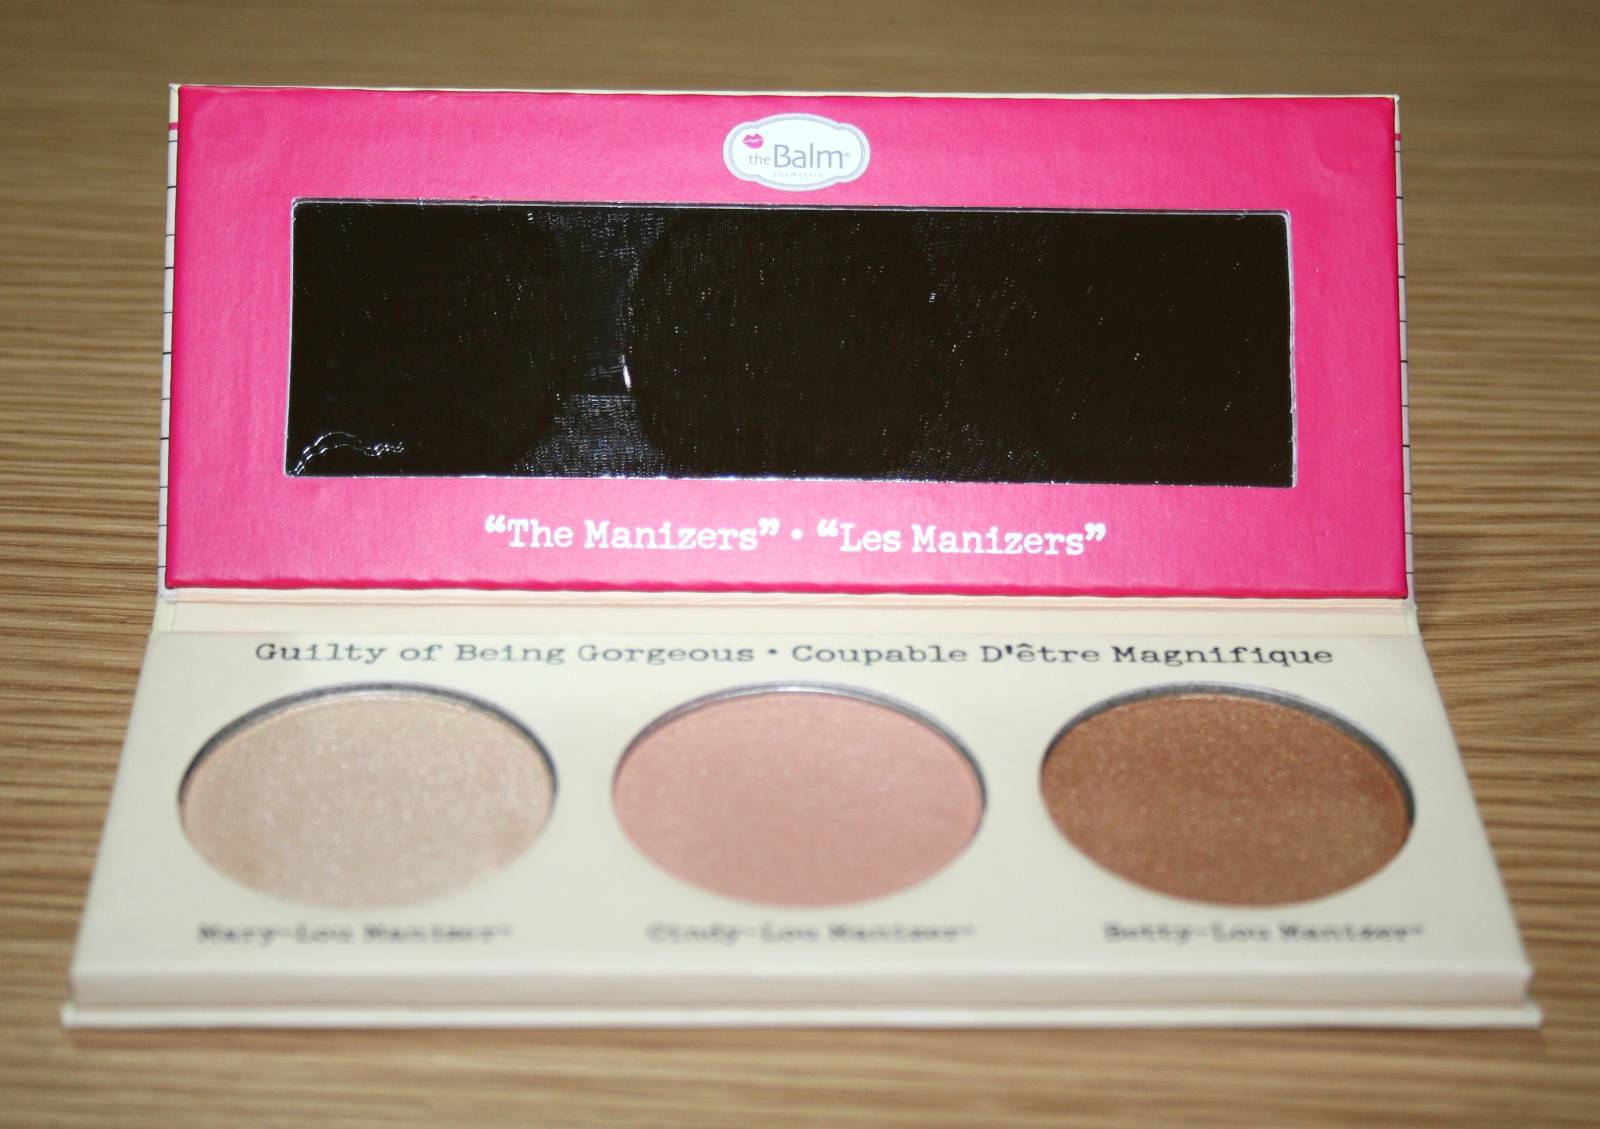 The Balm The Manizer Sisters Luminizers Palette